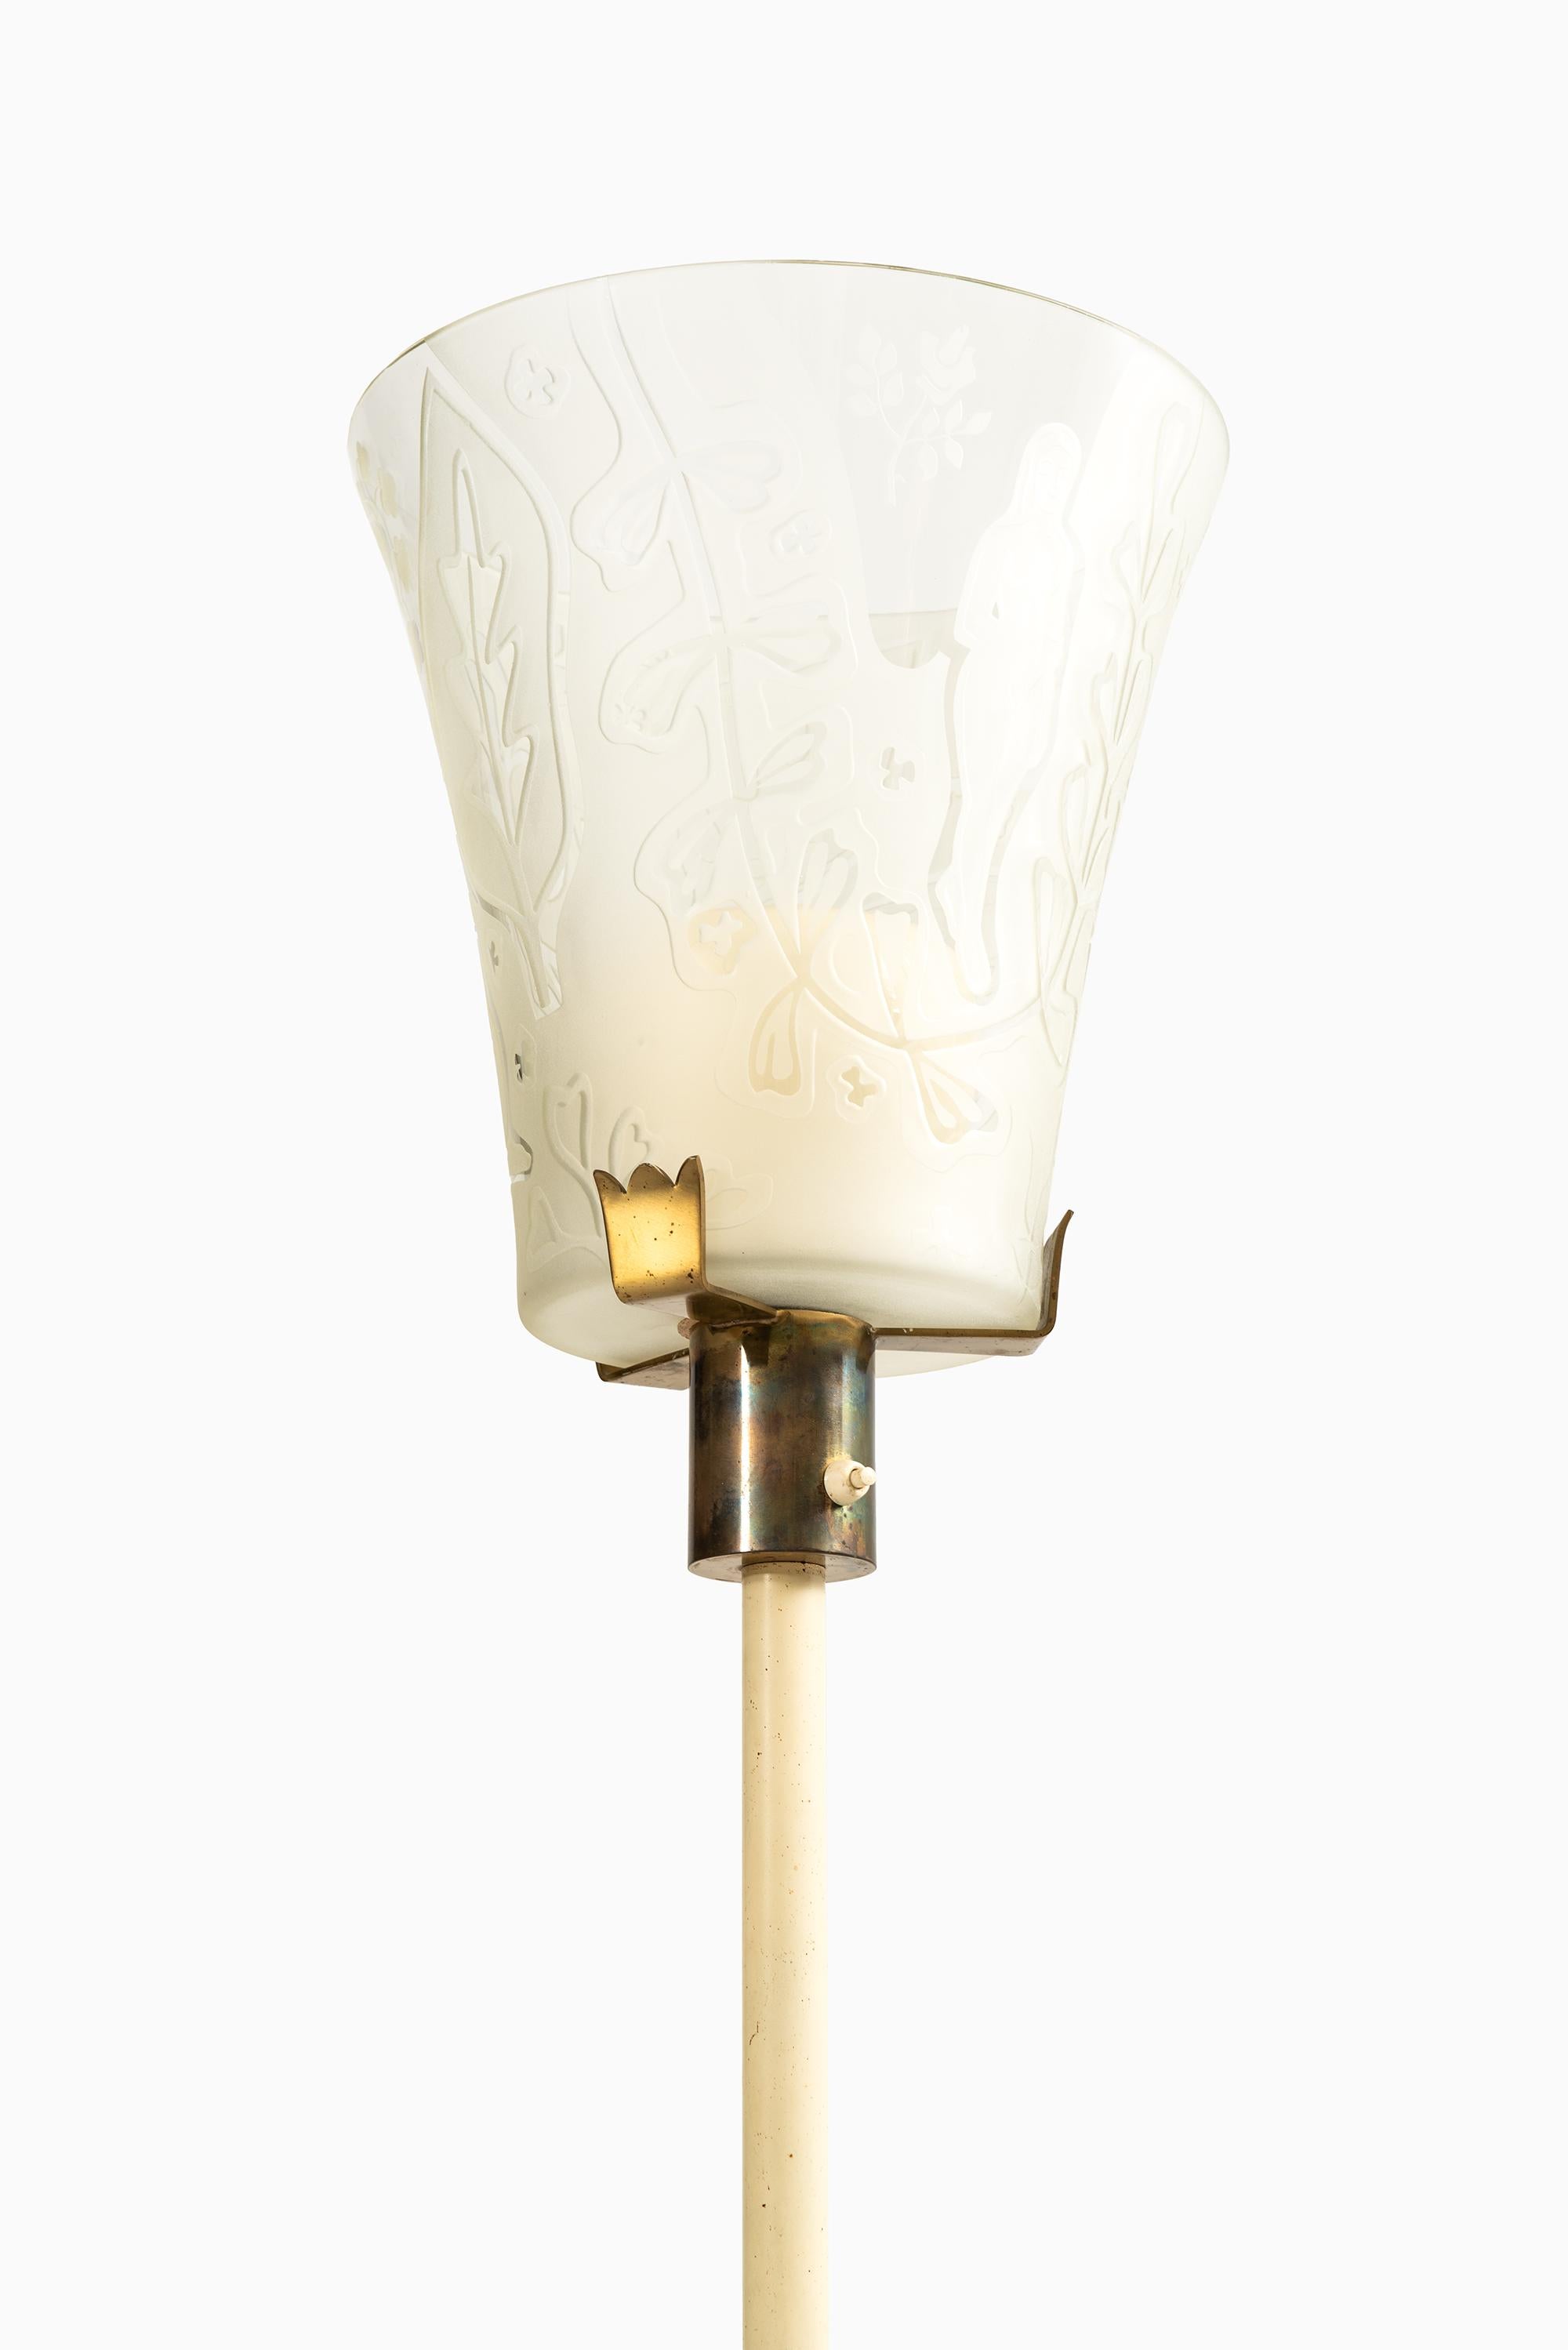 Very rare floor lamp designed by Bo Notini. Produced by Glössner & Co. in Sweden.